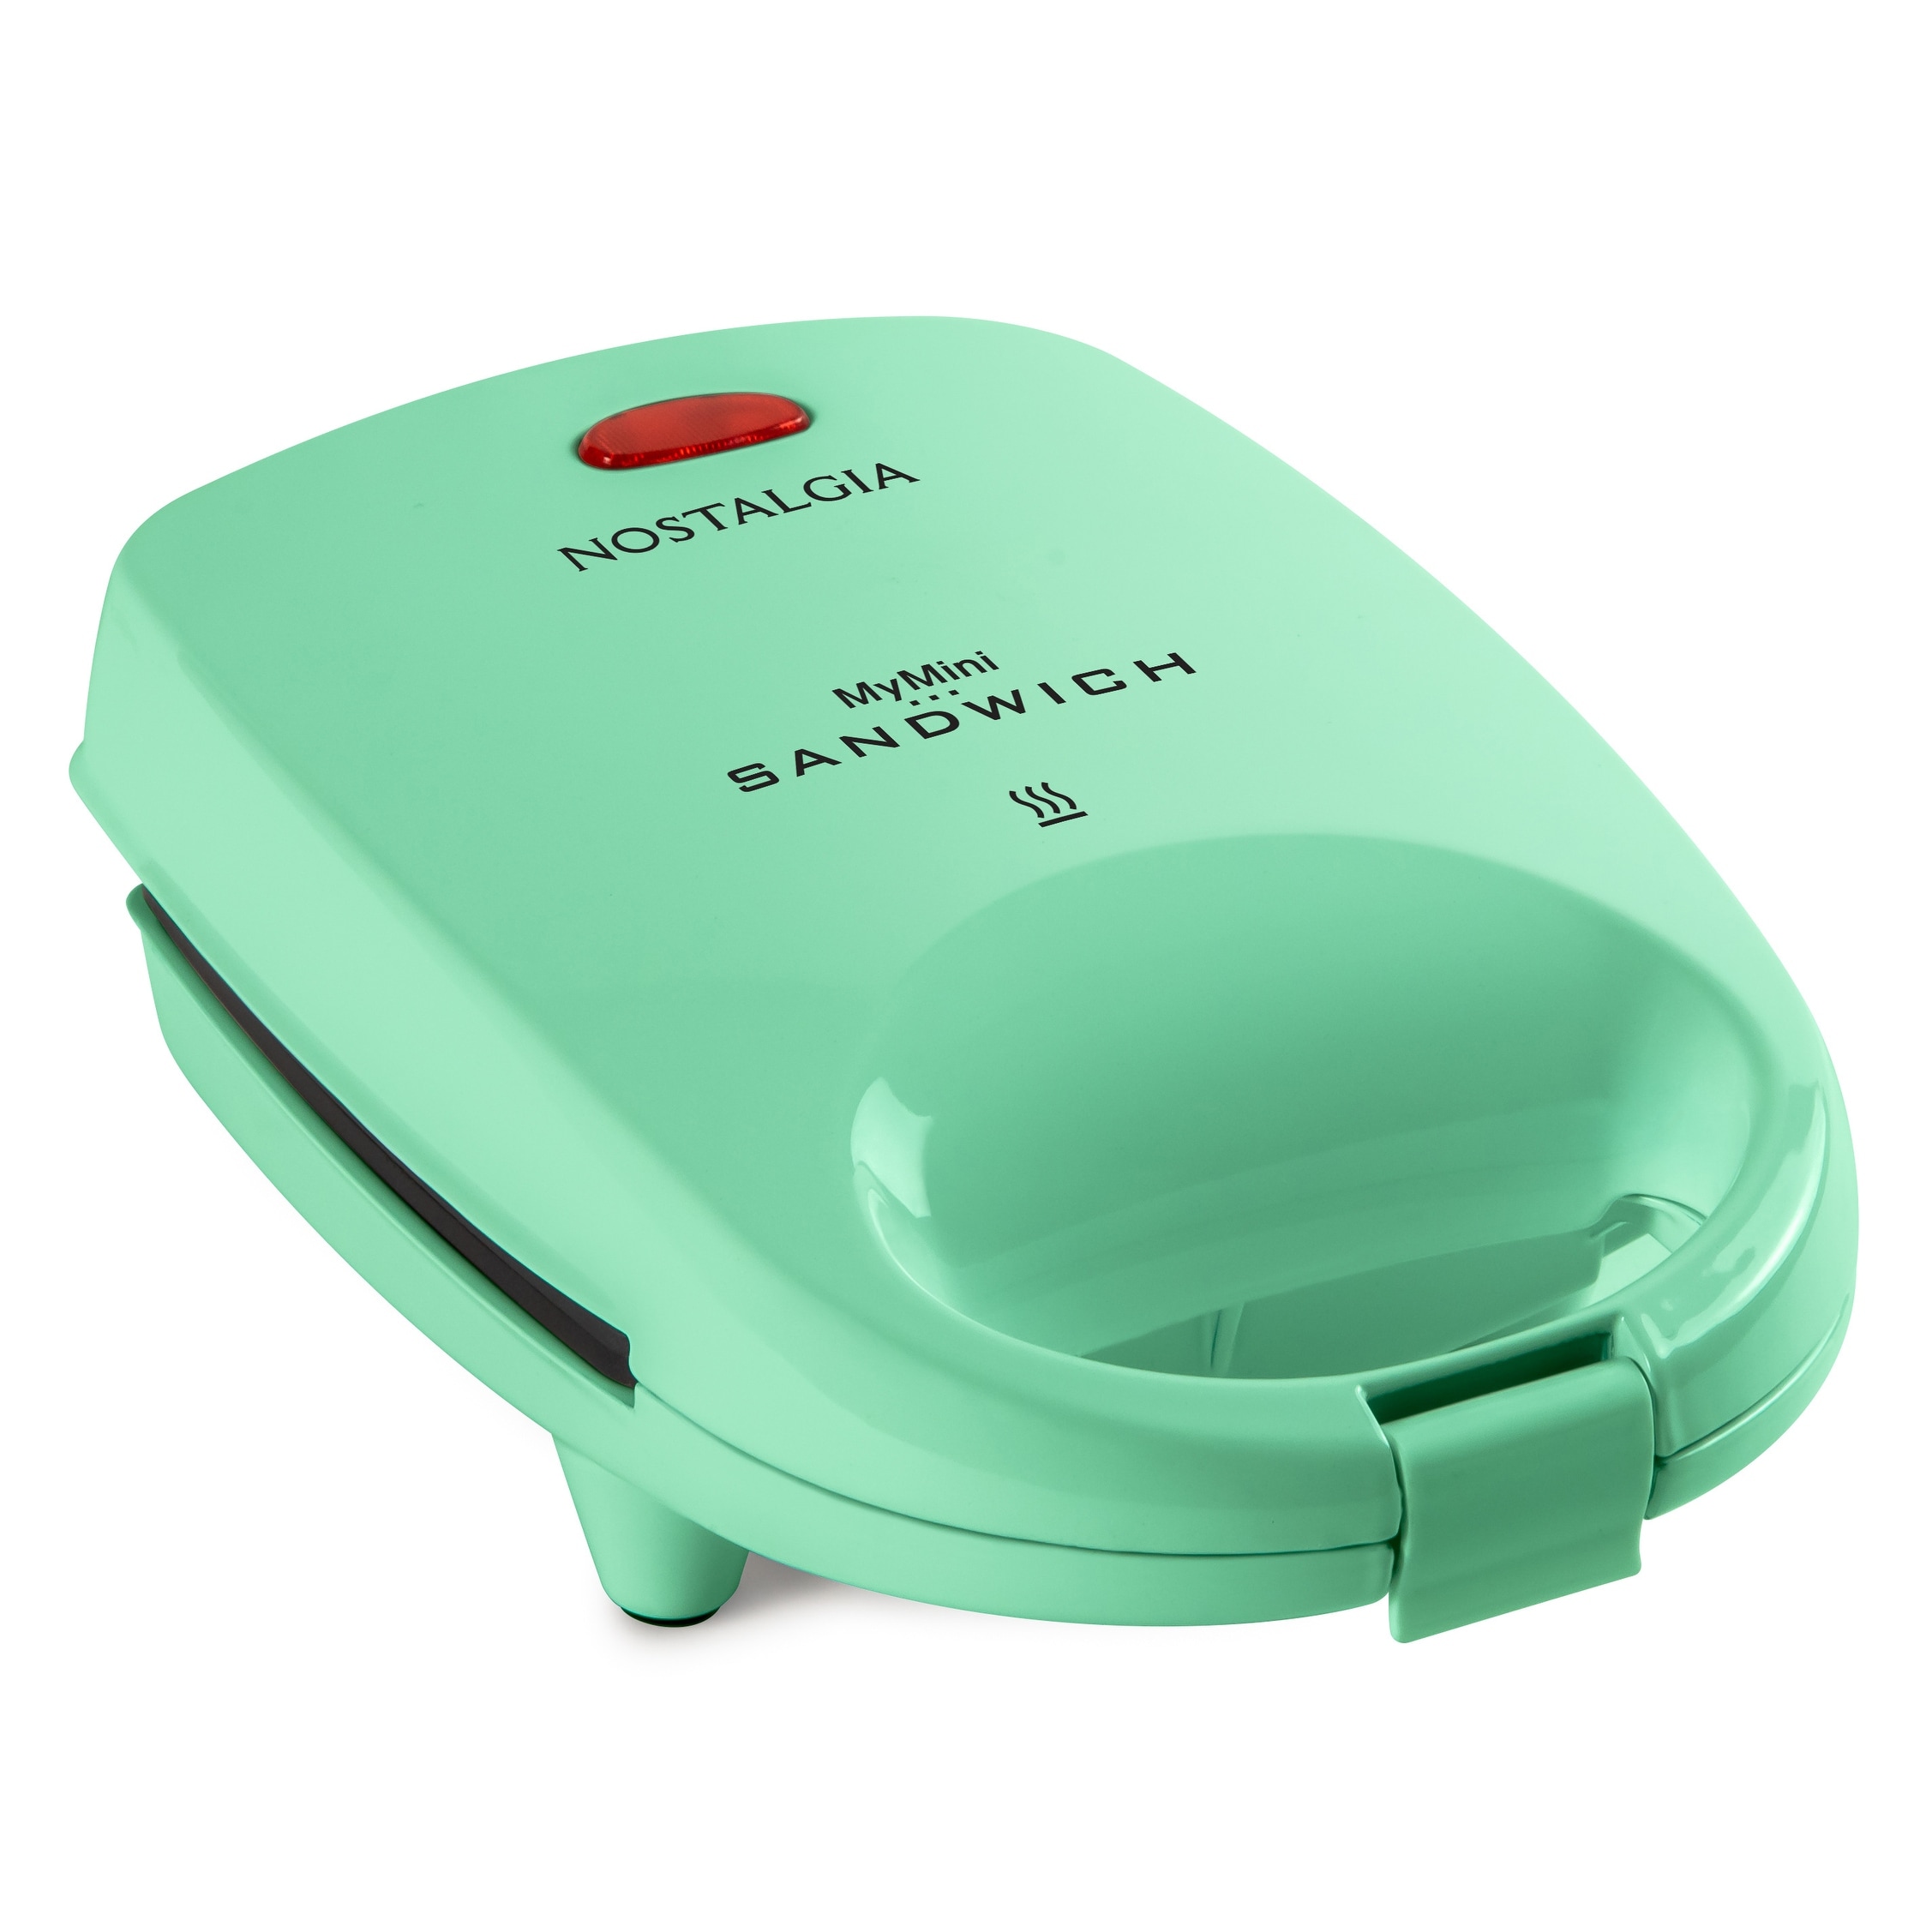 https://ak1.ostkcdn.com/images/products/is/images/direct/2d44c71d27e53555ad1288ebb01a162510c4a0bd/Nostalgia-MSAND5MG-MyMini-Personal-Sandwich-Maker.jpg